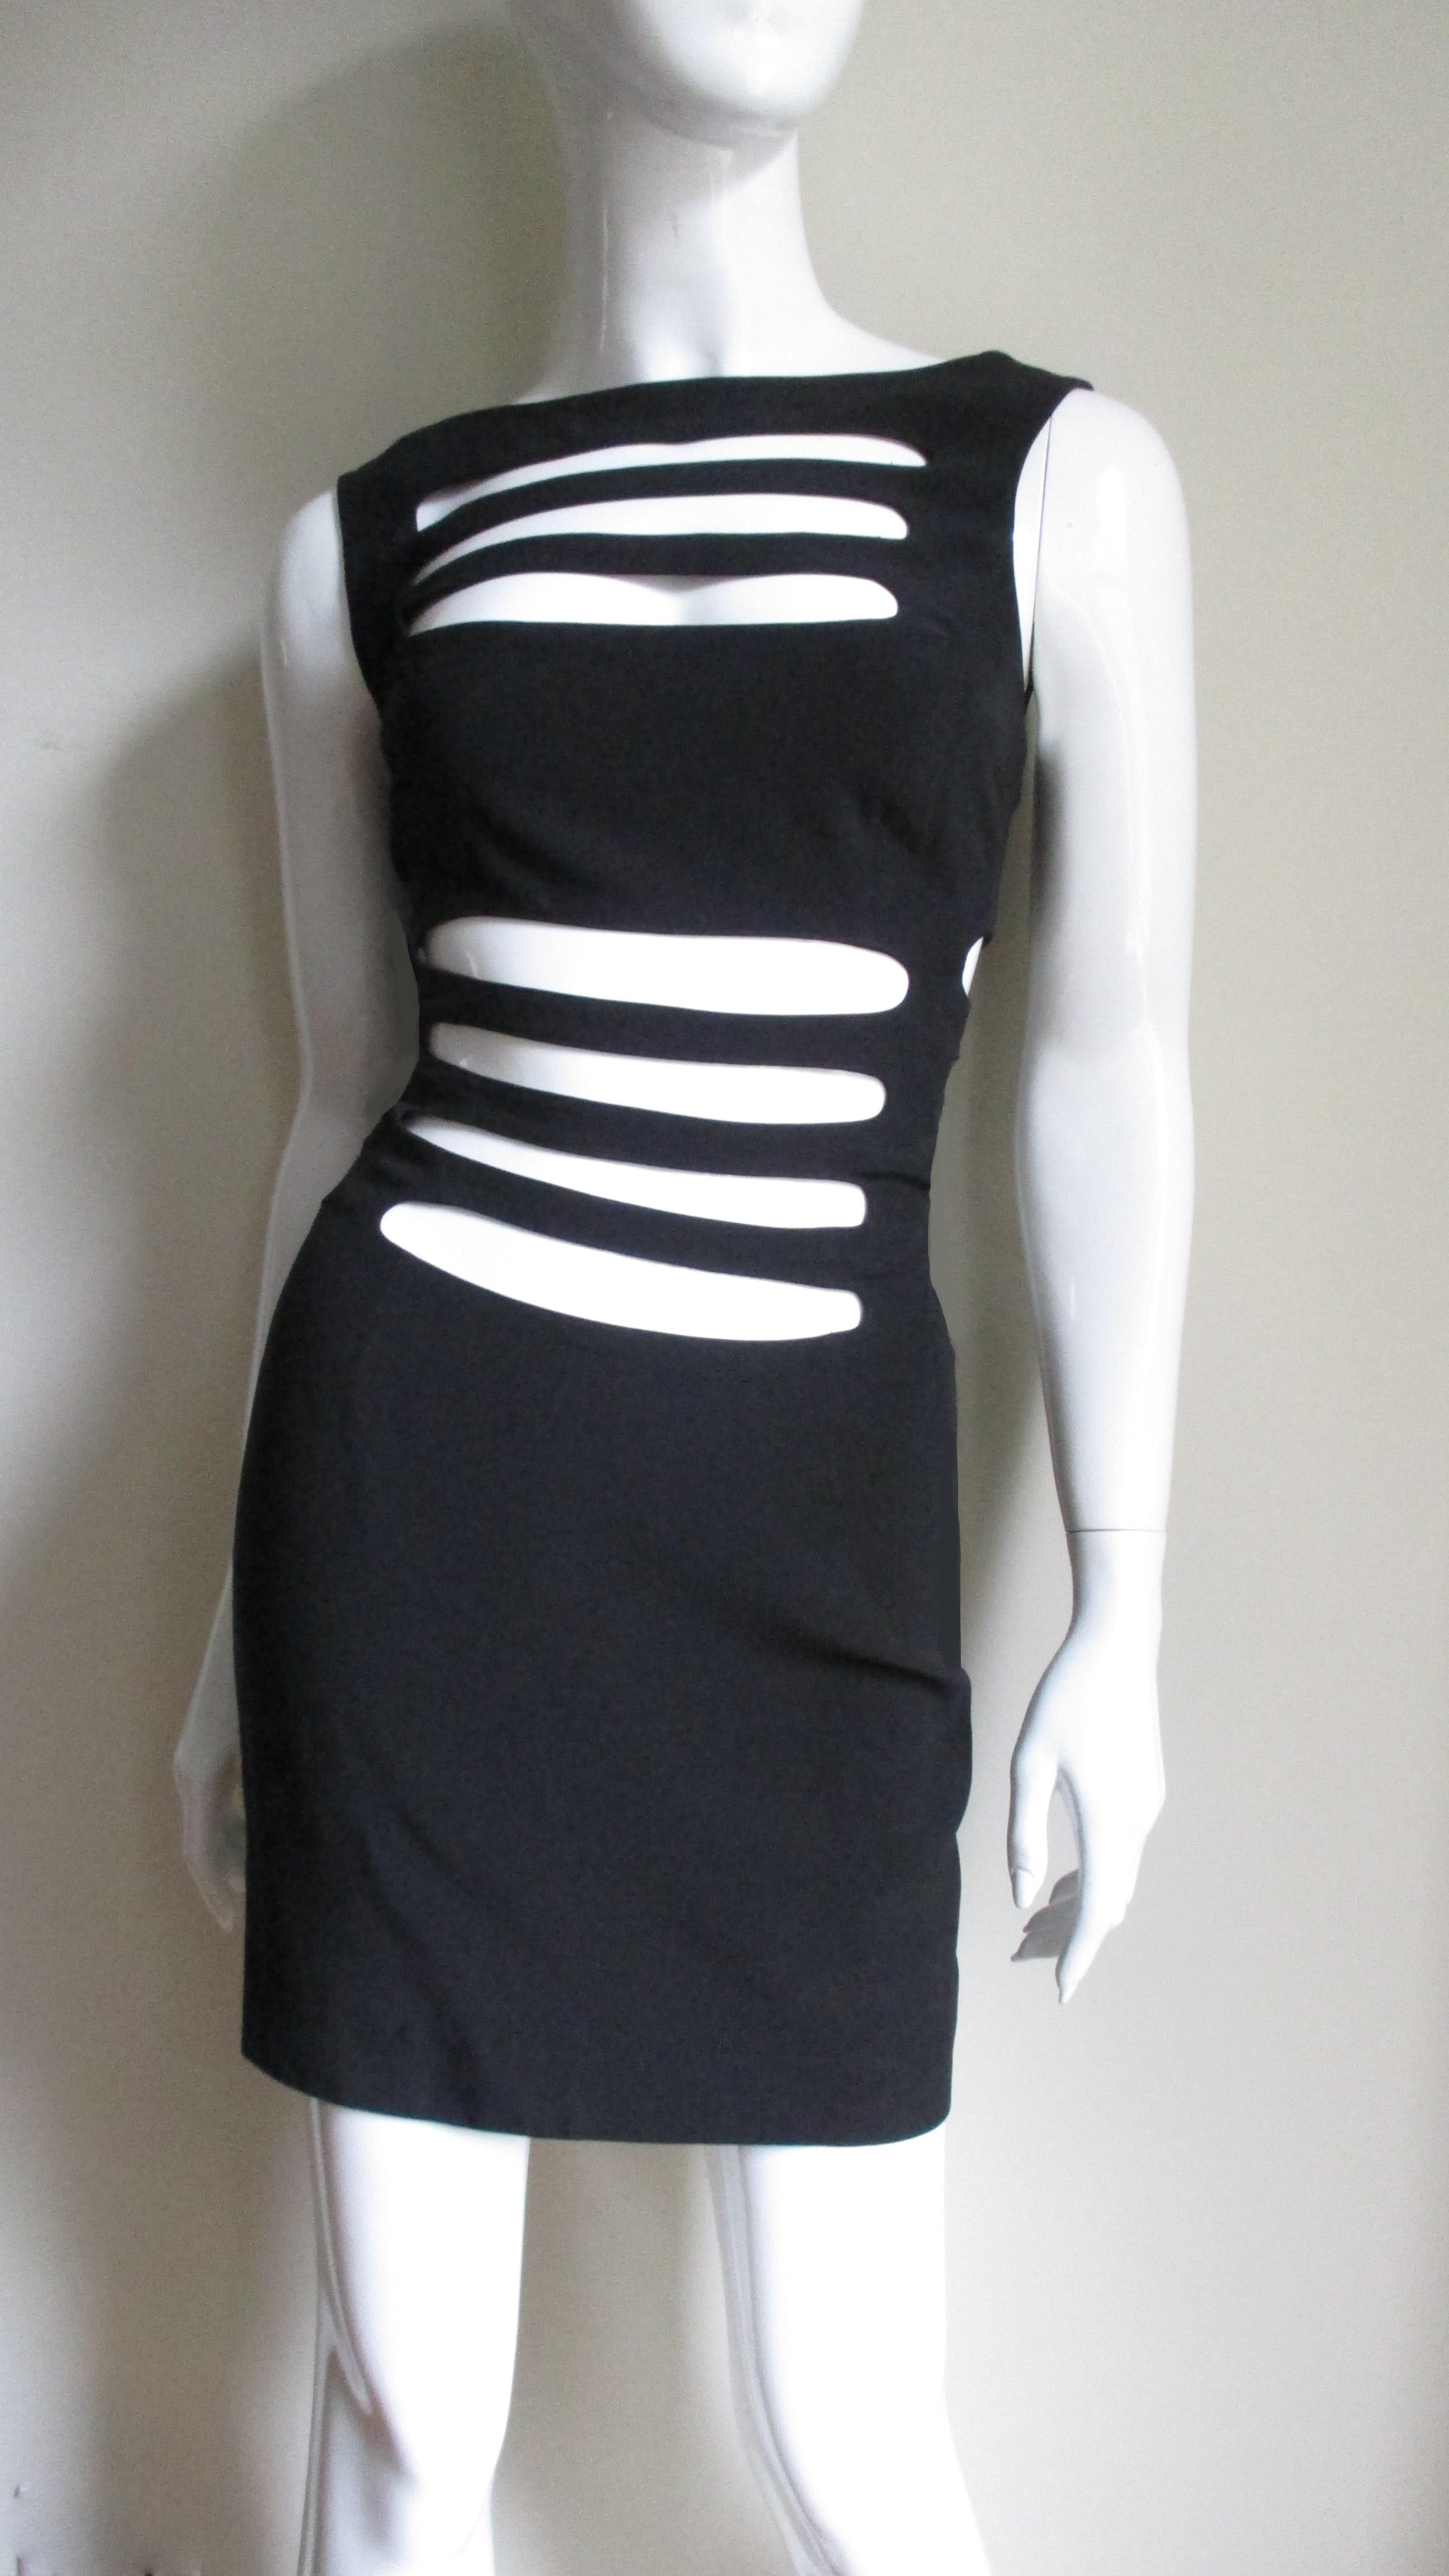 A fabulous black dress from French designer Sophie Sitbon.  It is a simple sleeveless crew neck dress with horizontal cut outs across the midriff, upper chest and sides.  The back is low cut,  the dress is unlined and has a center back black zipper.